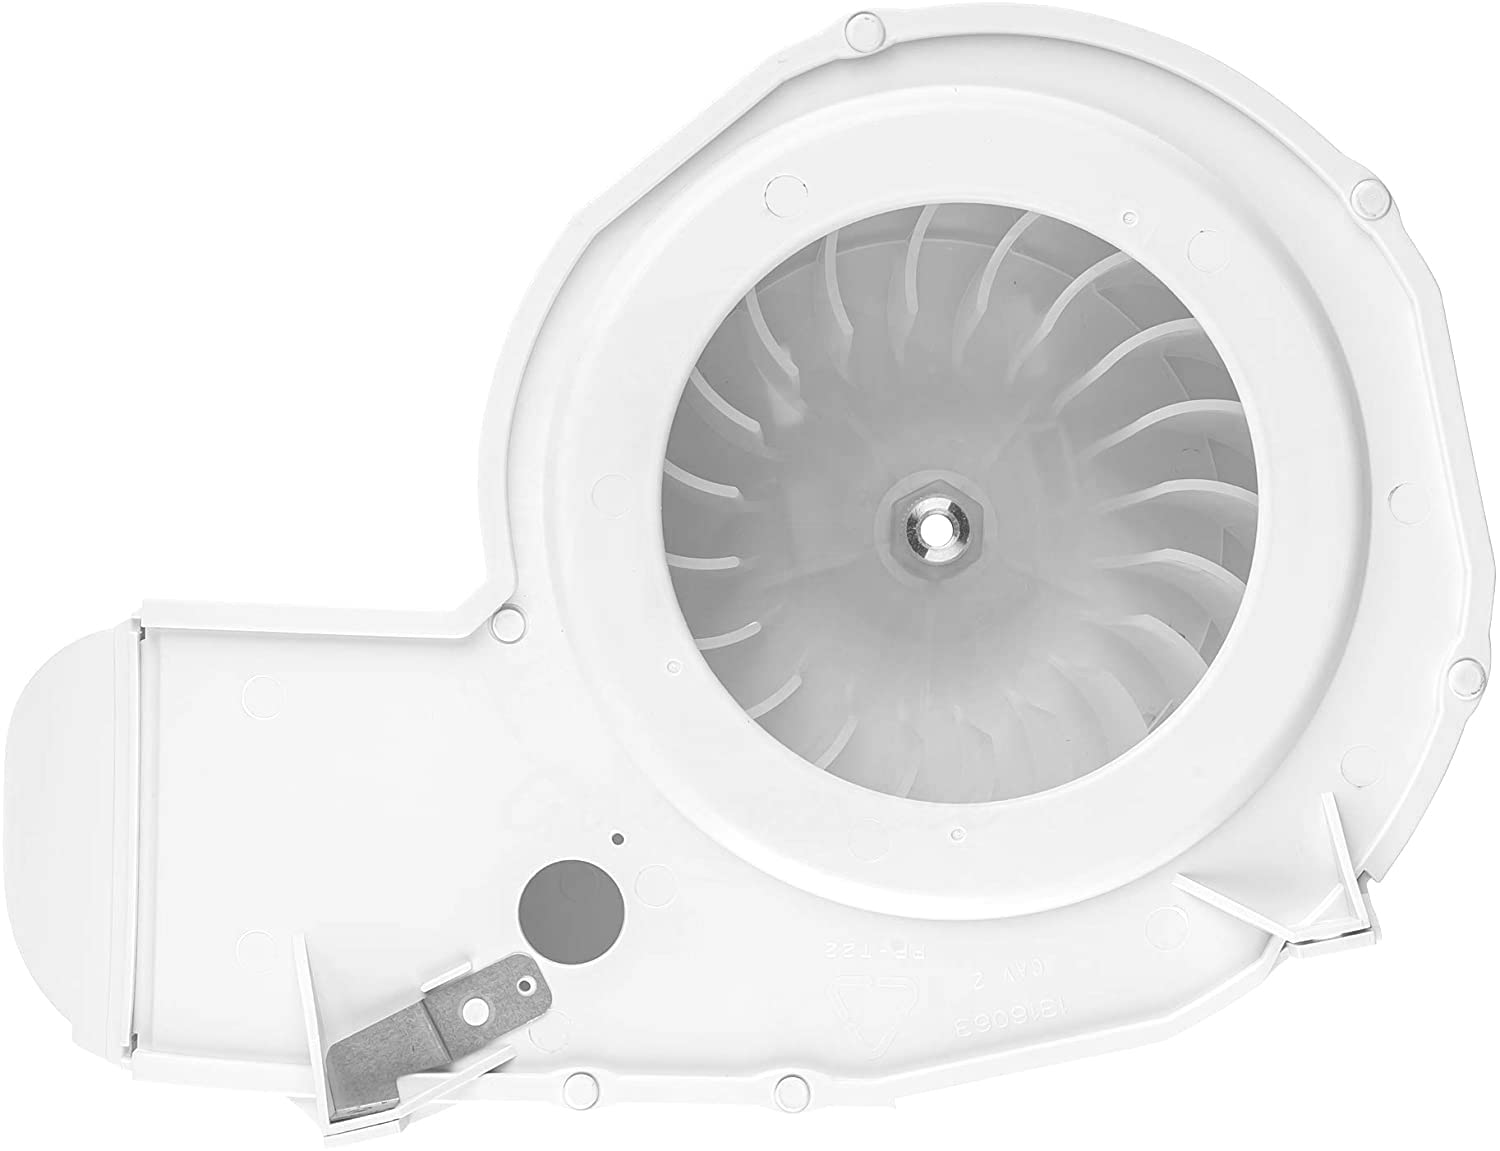 Lifetime Appliance P UPgRADED Lifetime Appliance 131775600 Blower Housing Assembly compatible with Frigidaire, Kenmore, Sears Dryer